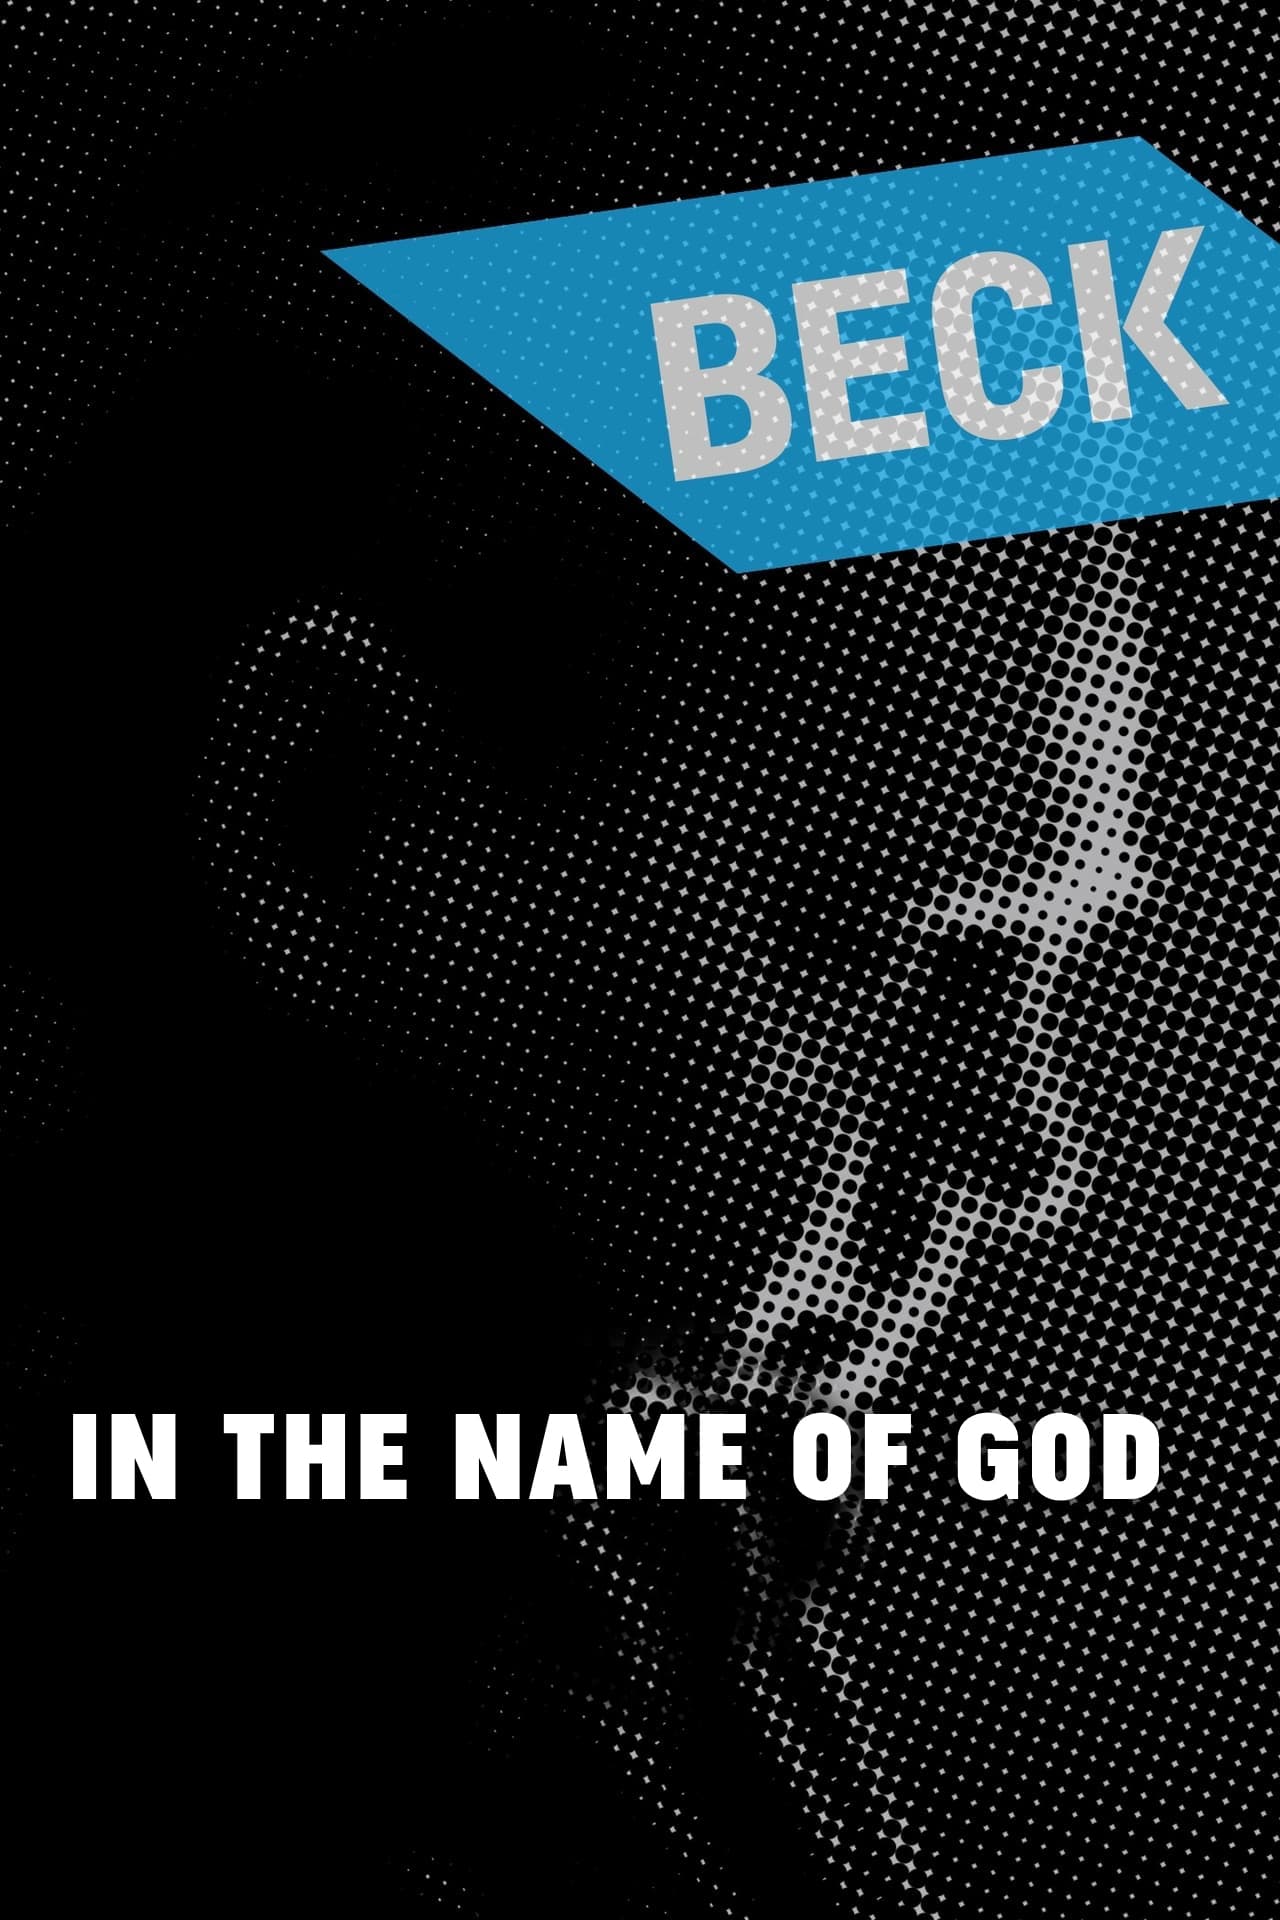 Beck 24 - In the Name of God